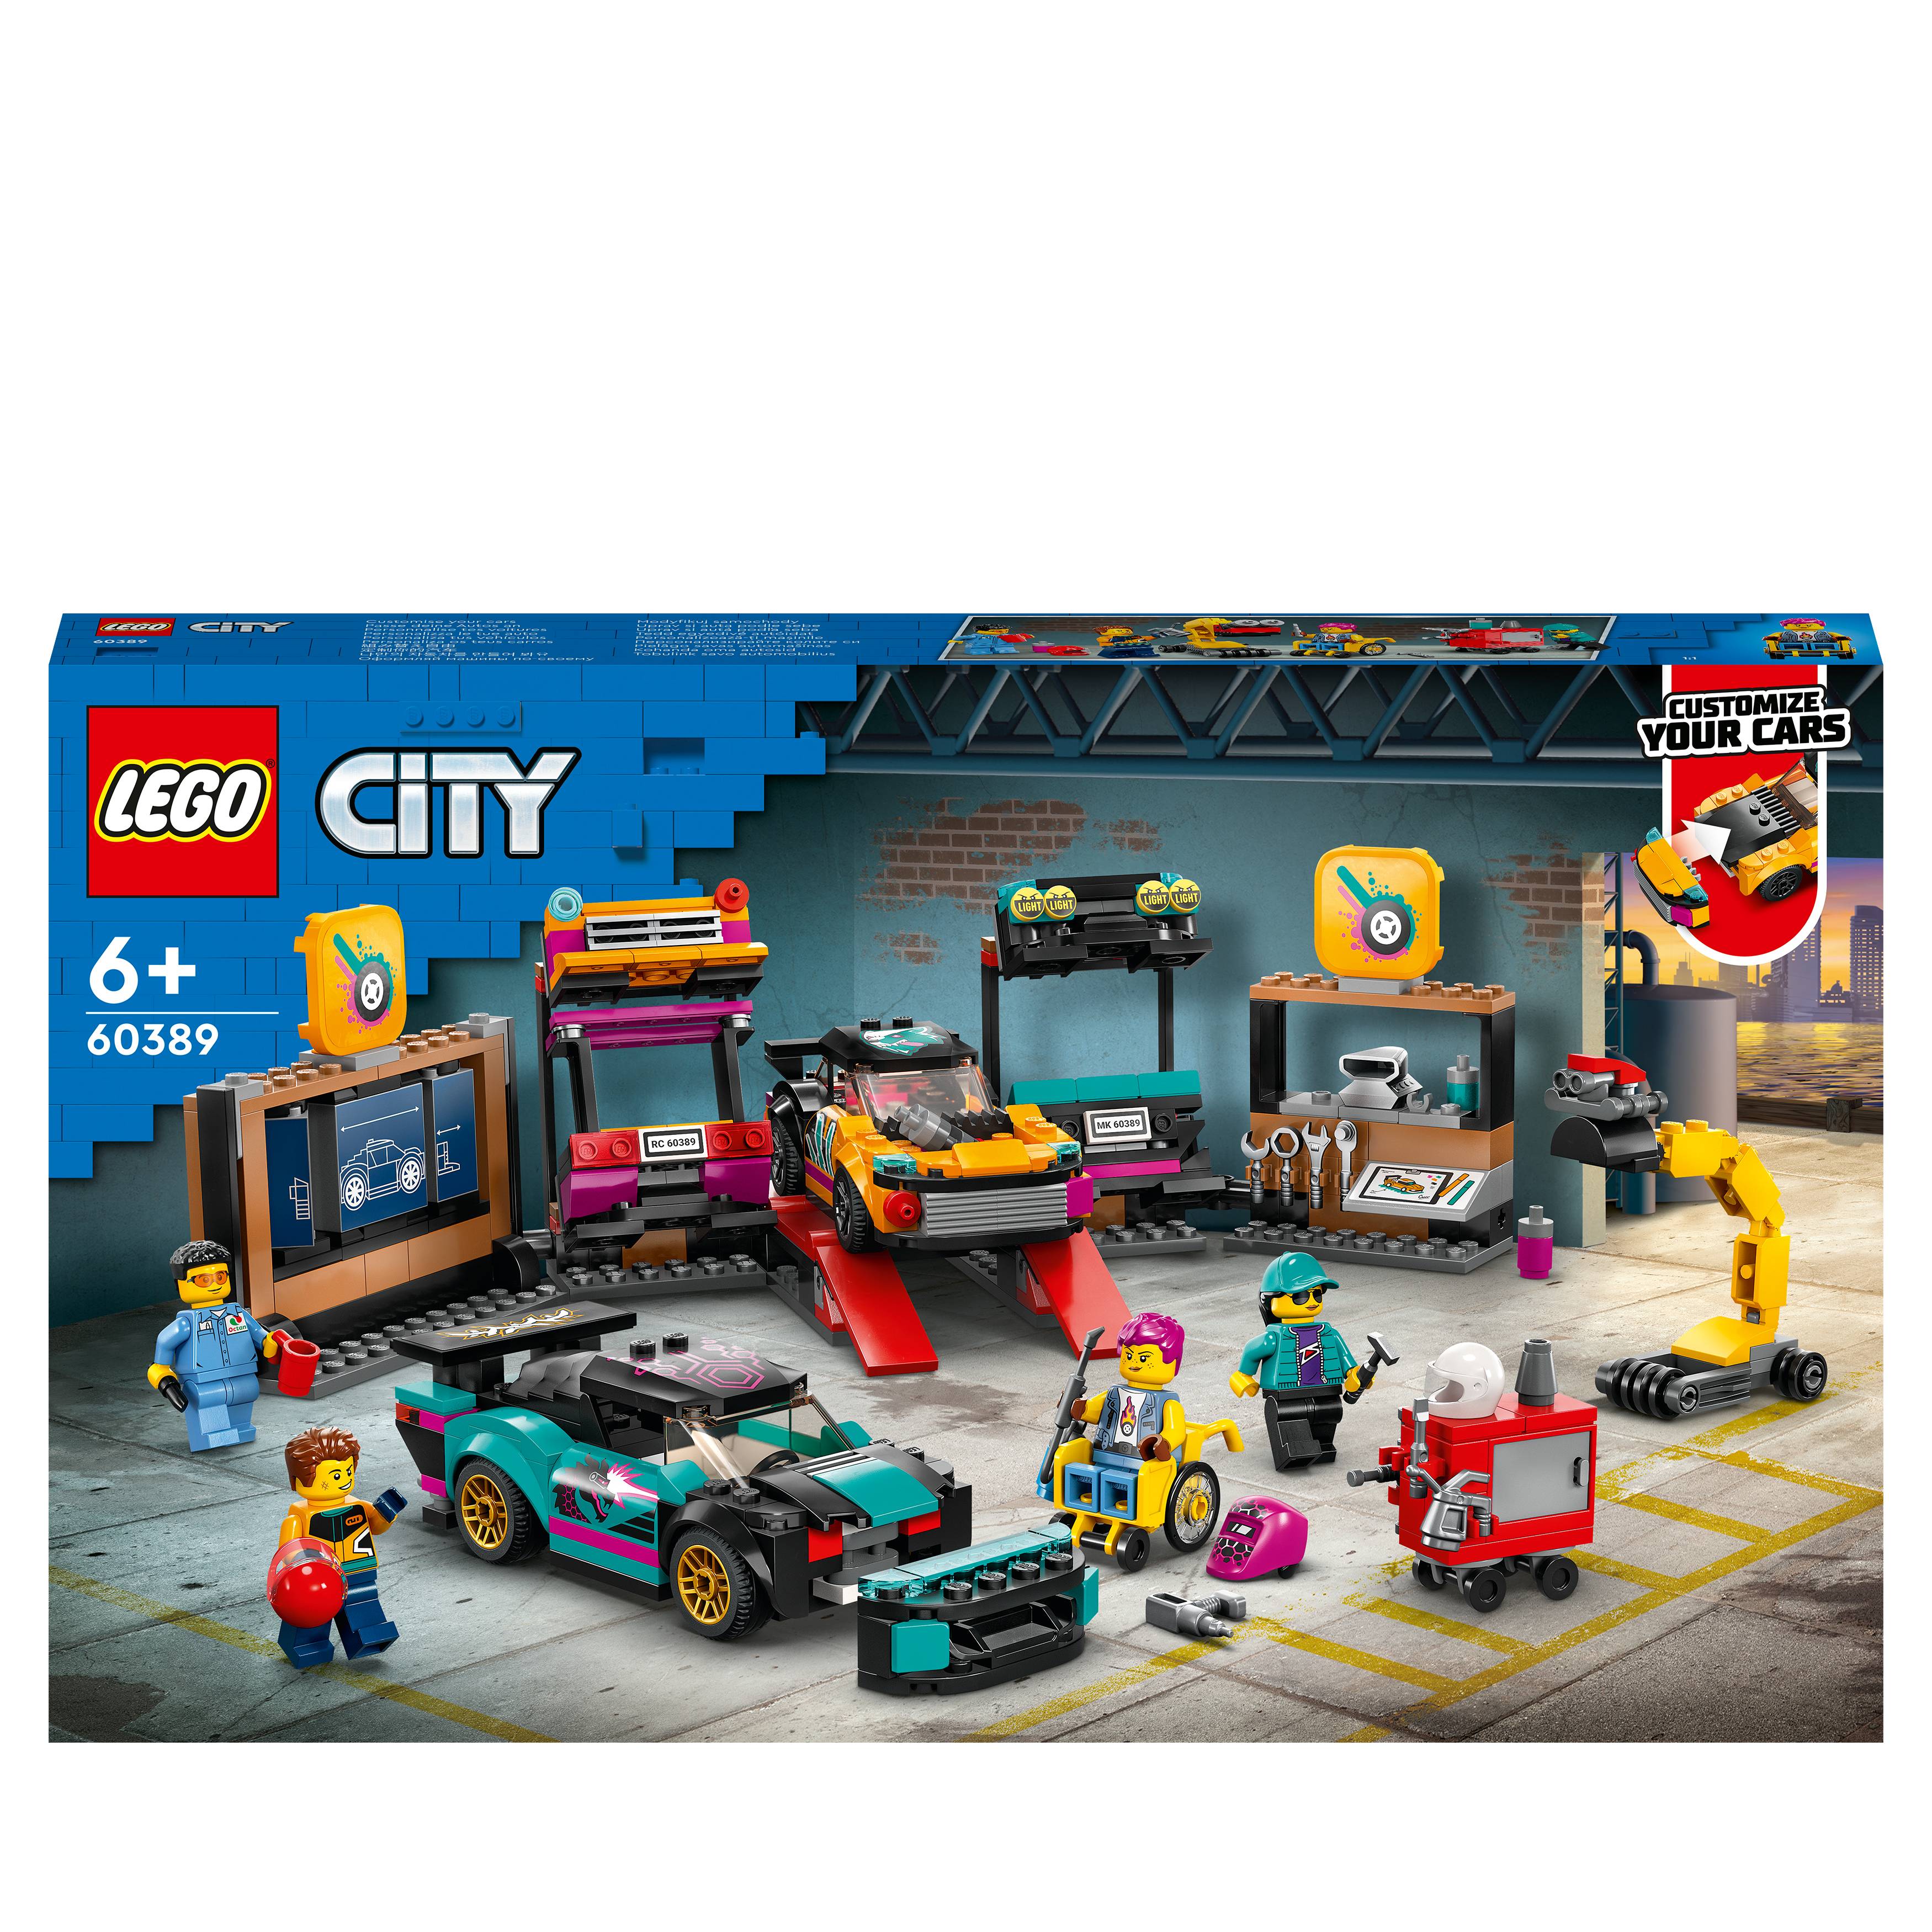 Materialisme Dicht melodie LEGO® CITY 60389 Autowerkplaats kopen ? Conrad Electronic